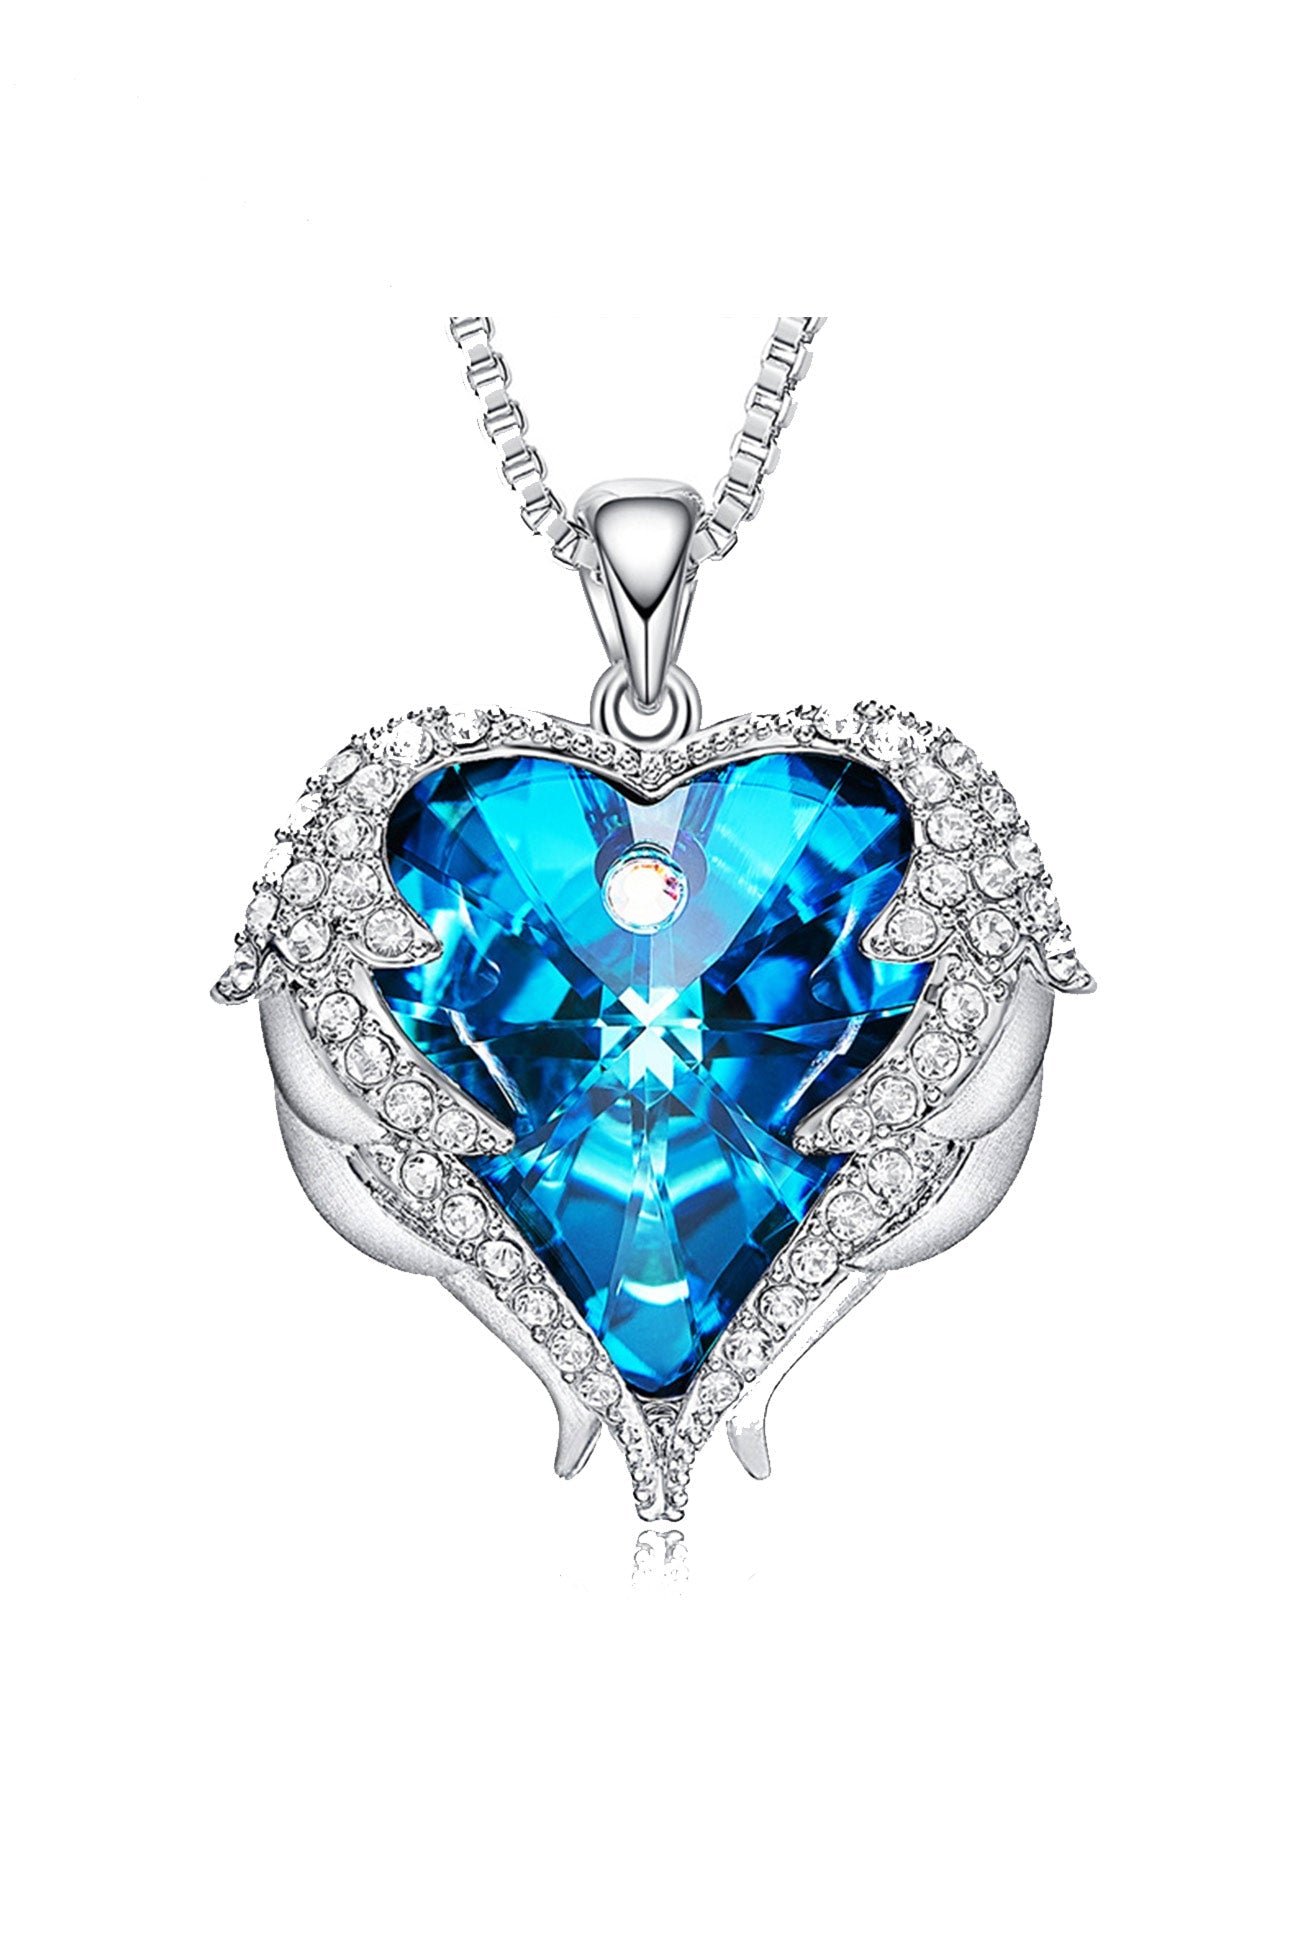 Flytonn-Valentine's Day gift Angel Wings Crystal Necklace